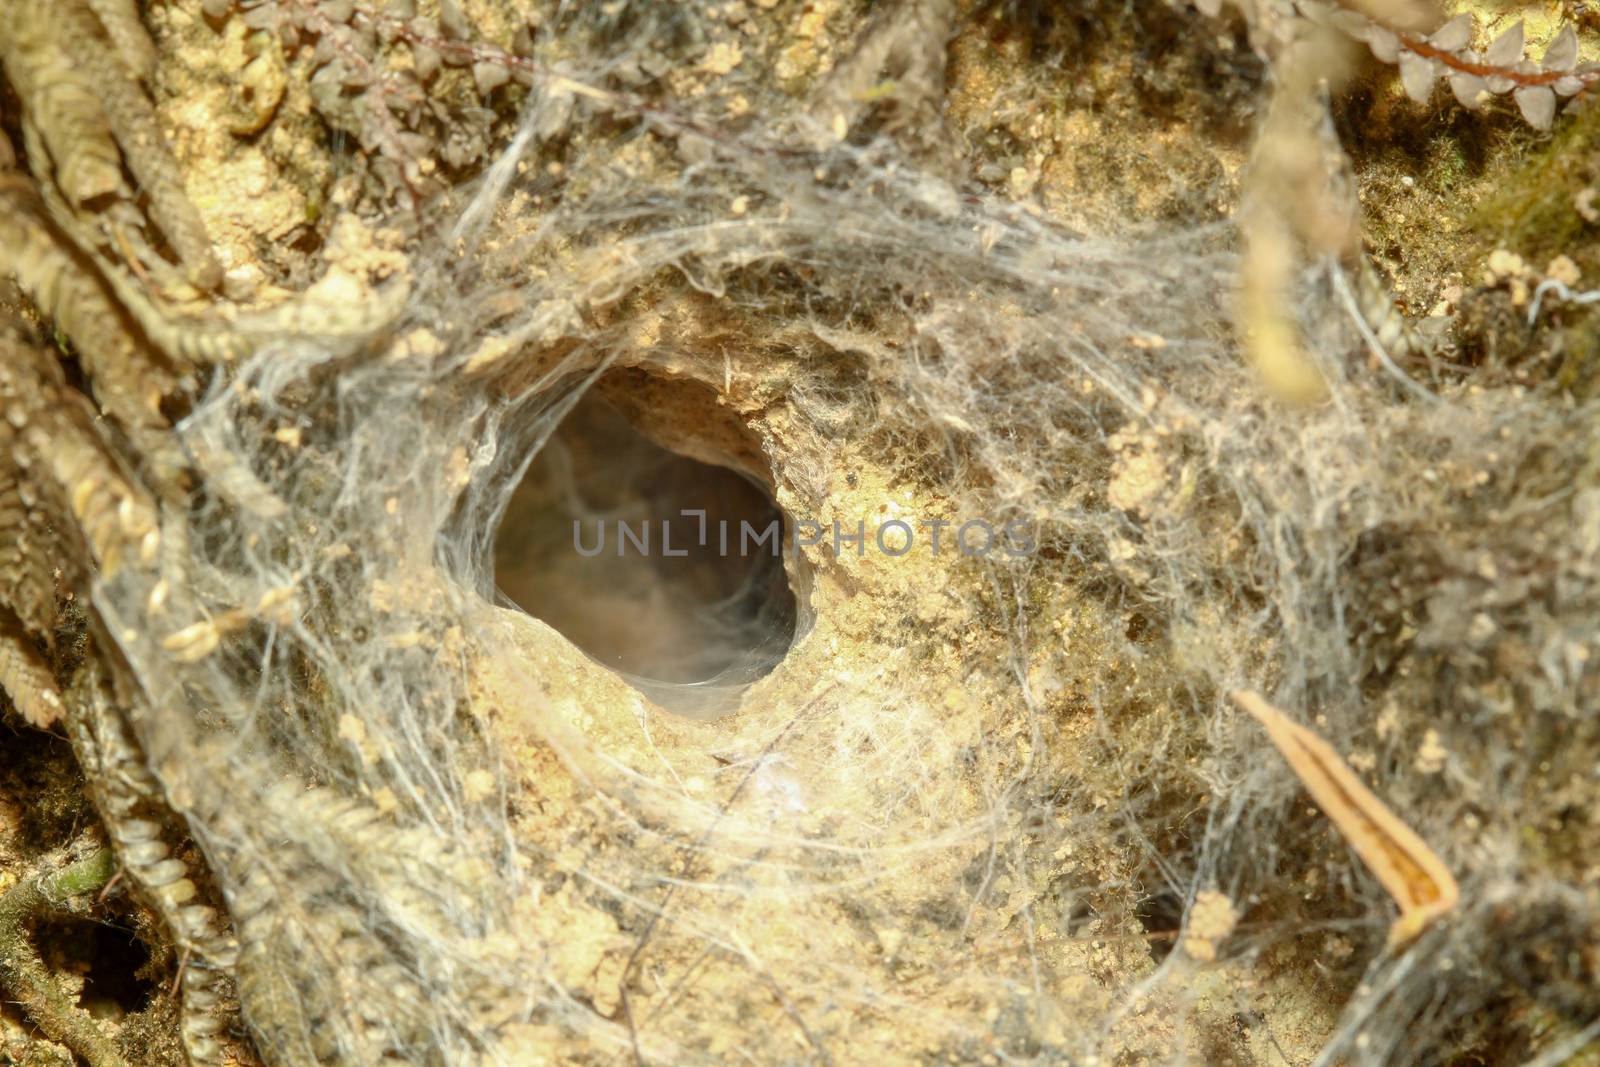 spider hole in soil at forest by pumppump